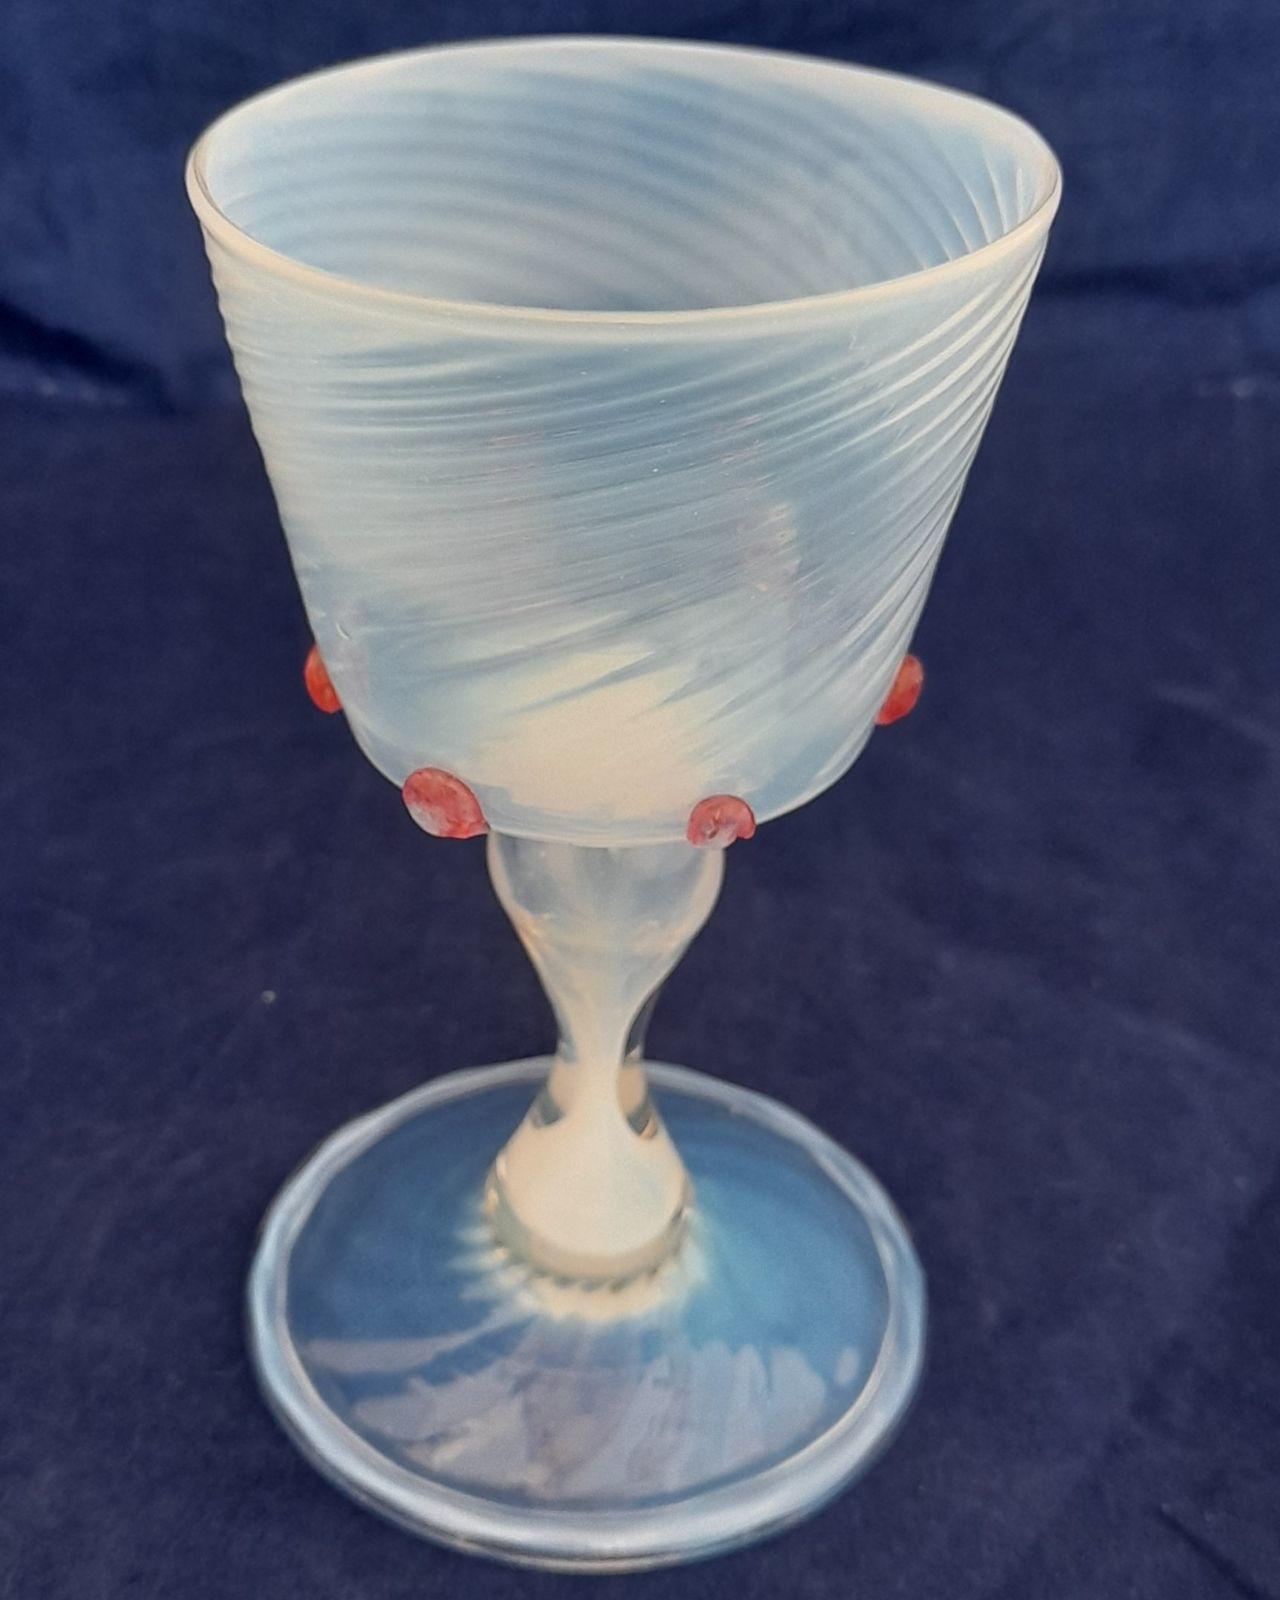 Antique Antonio Salviati & Co Façon de Venise Wrythen Fluted Opal Wine Glass circa 1880.  The wrythen fluted bucket shaped bowl with six applied red prunts, all on a hollow hour glass opal stem, on a wrythen fluted folded foot with a rough pontil. Some typical minor surface wear.